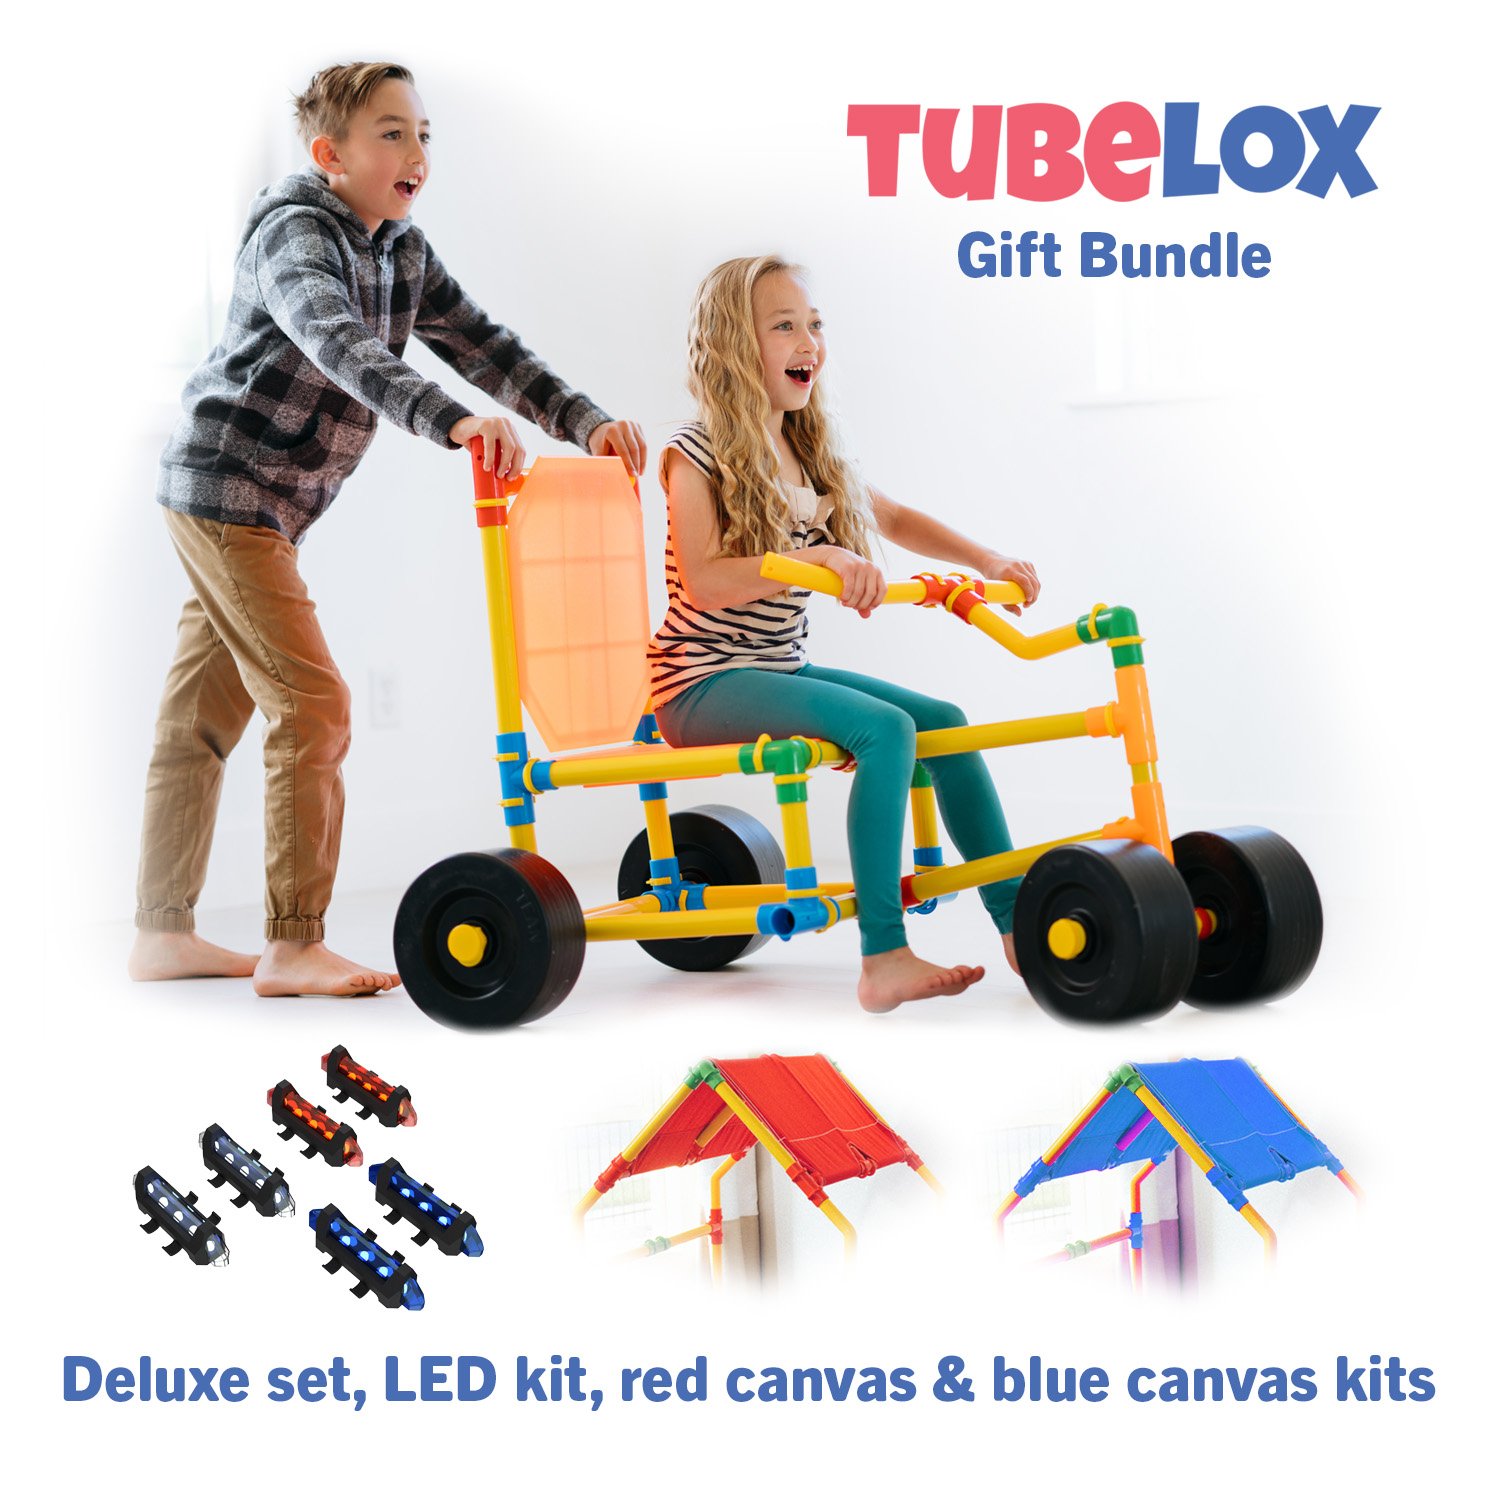 TUBCLOX Gift Bundle Deluxe set, LED kit, red canvas blue canvas kits 